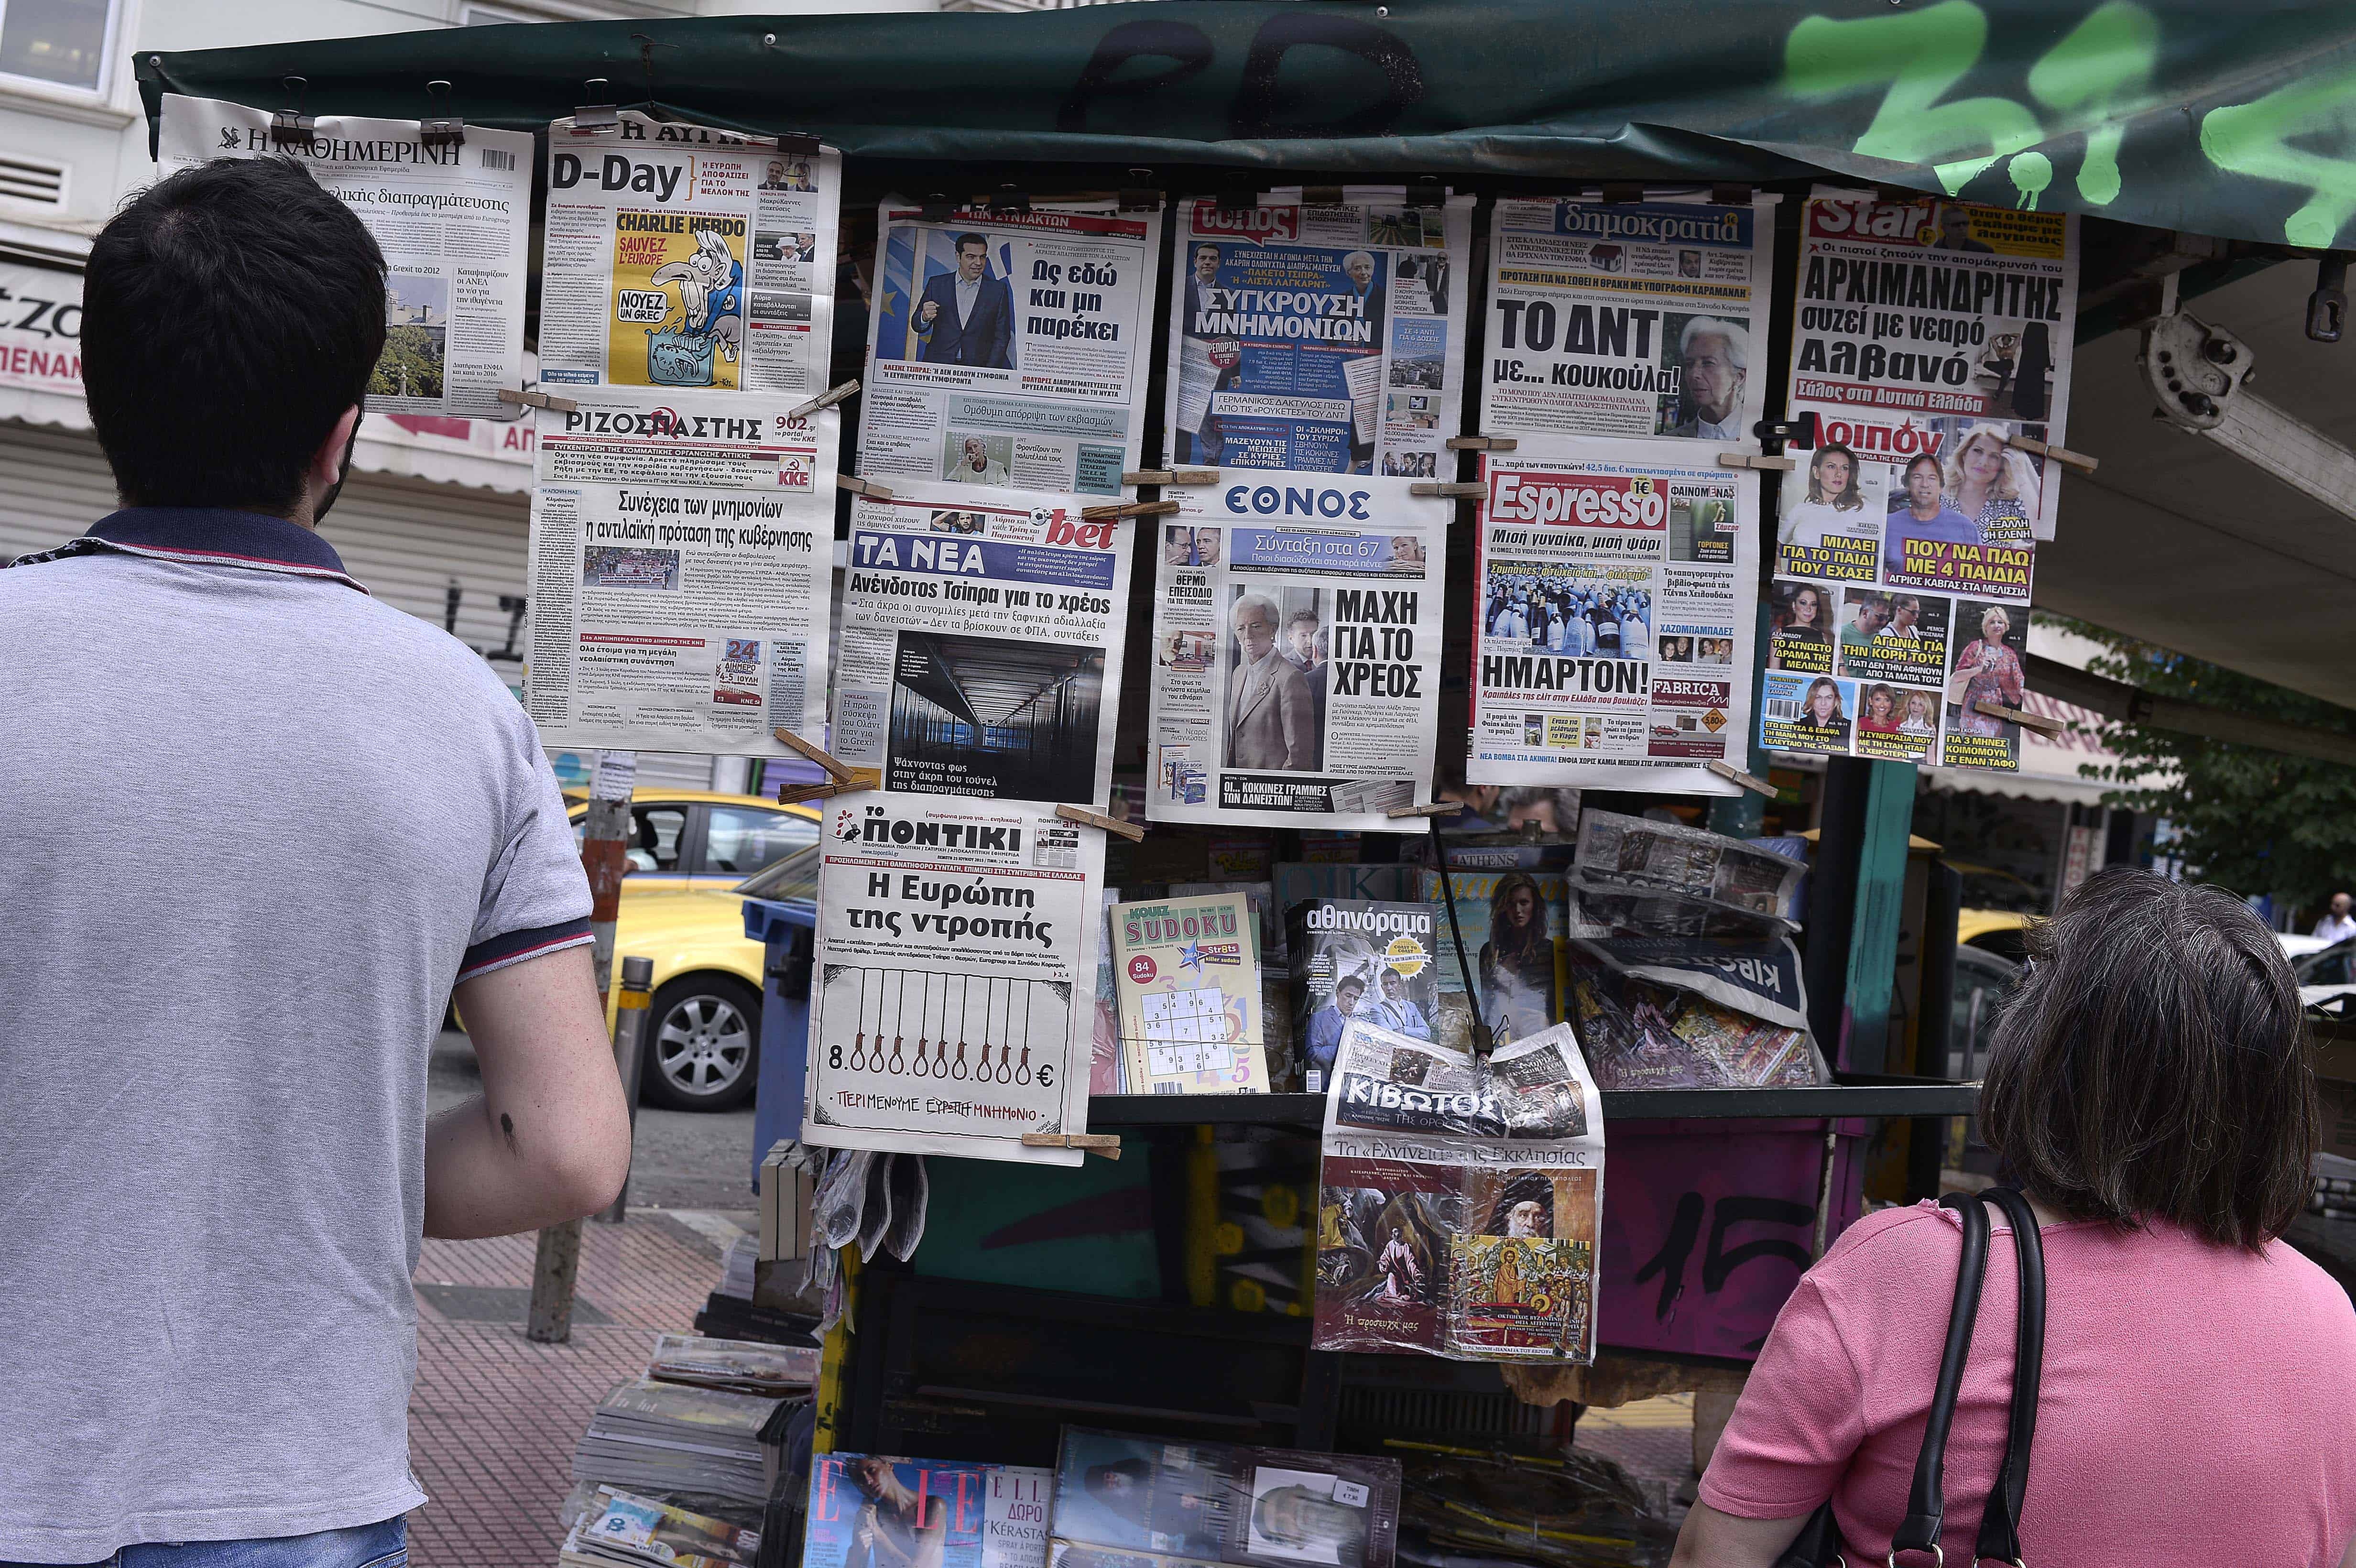 Onlookers view newspaper headlines in central Athens on June 25, 2015.